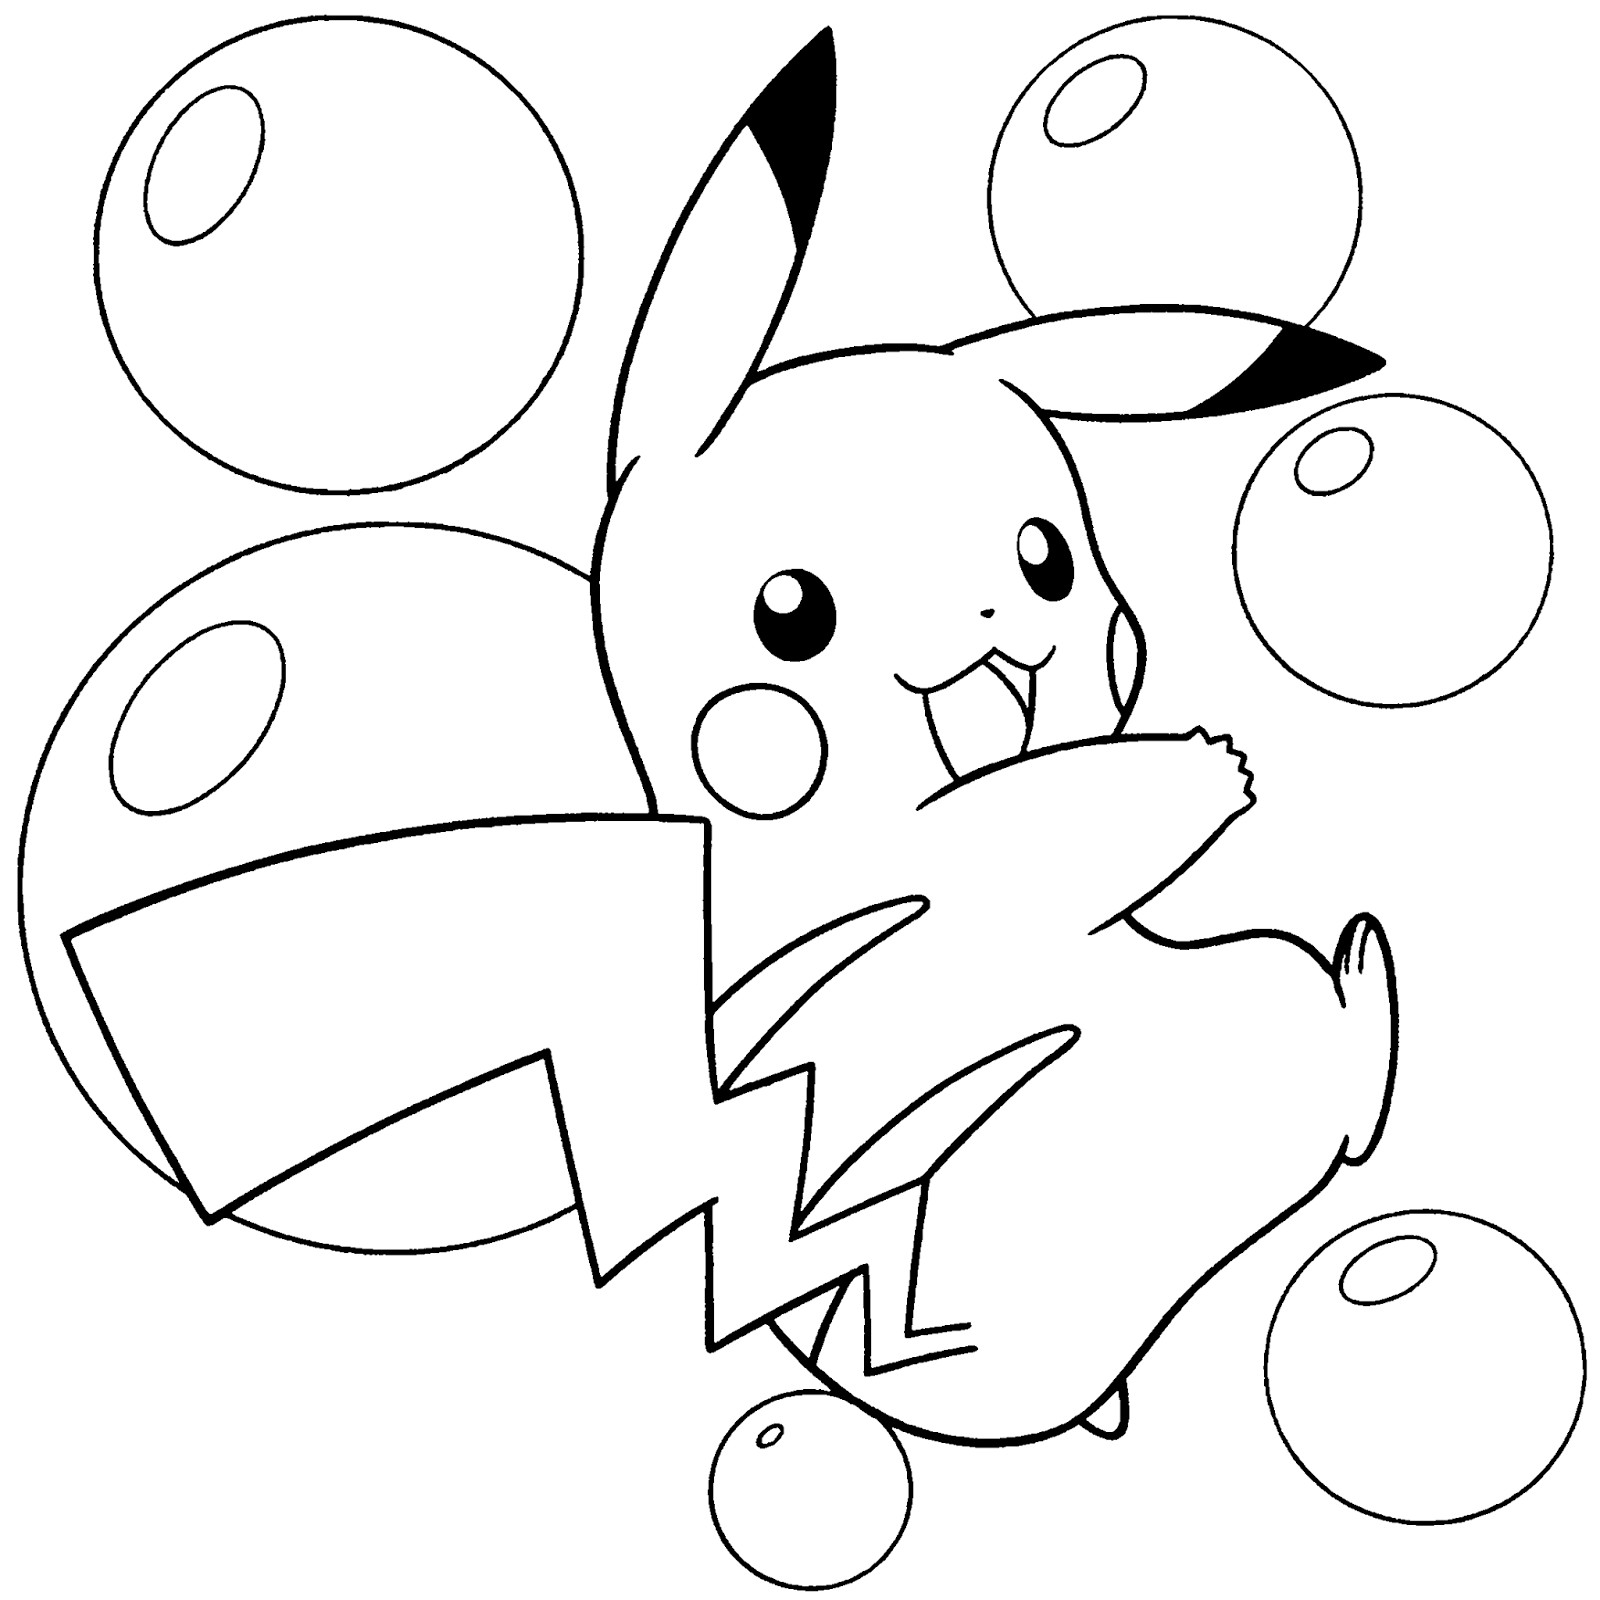 Printable Pokemon Coloring Pages
 Pokemon Coloring Pages for Kids